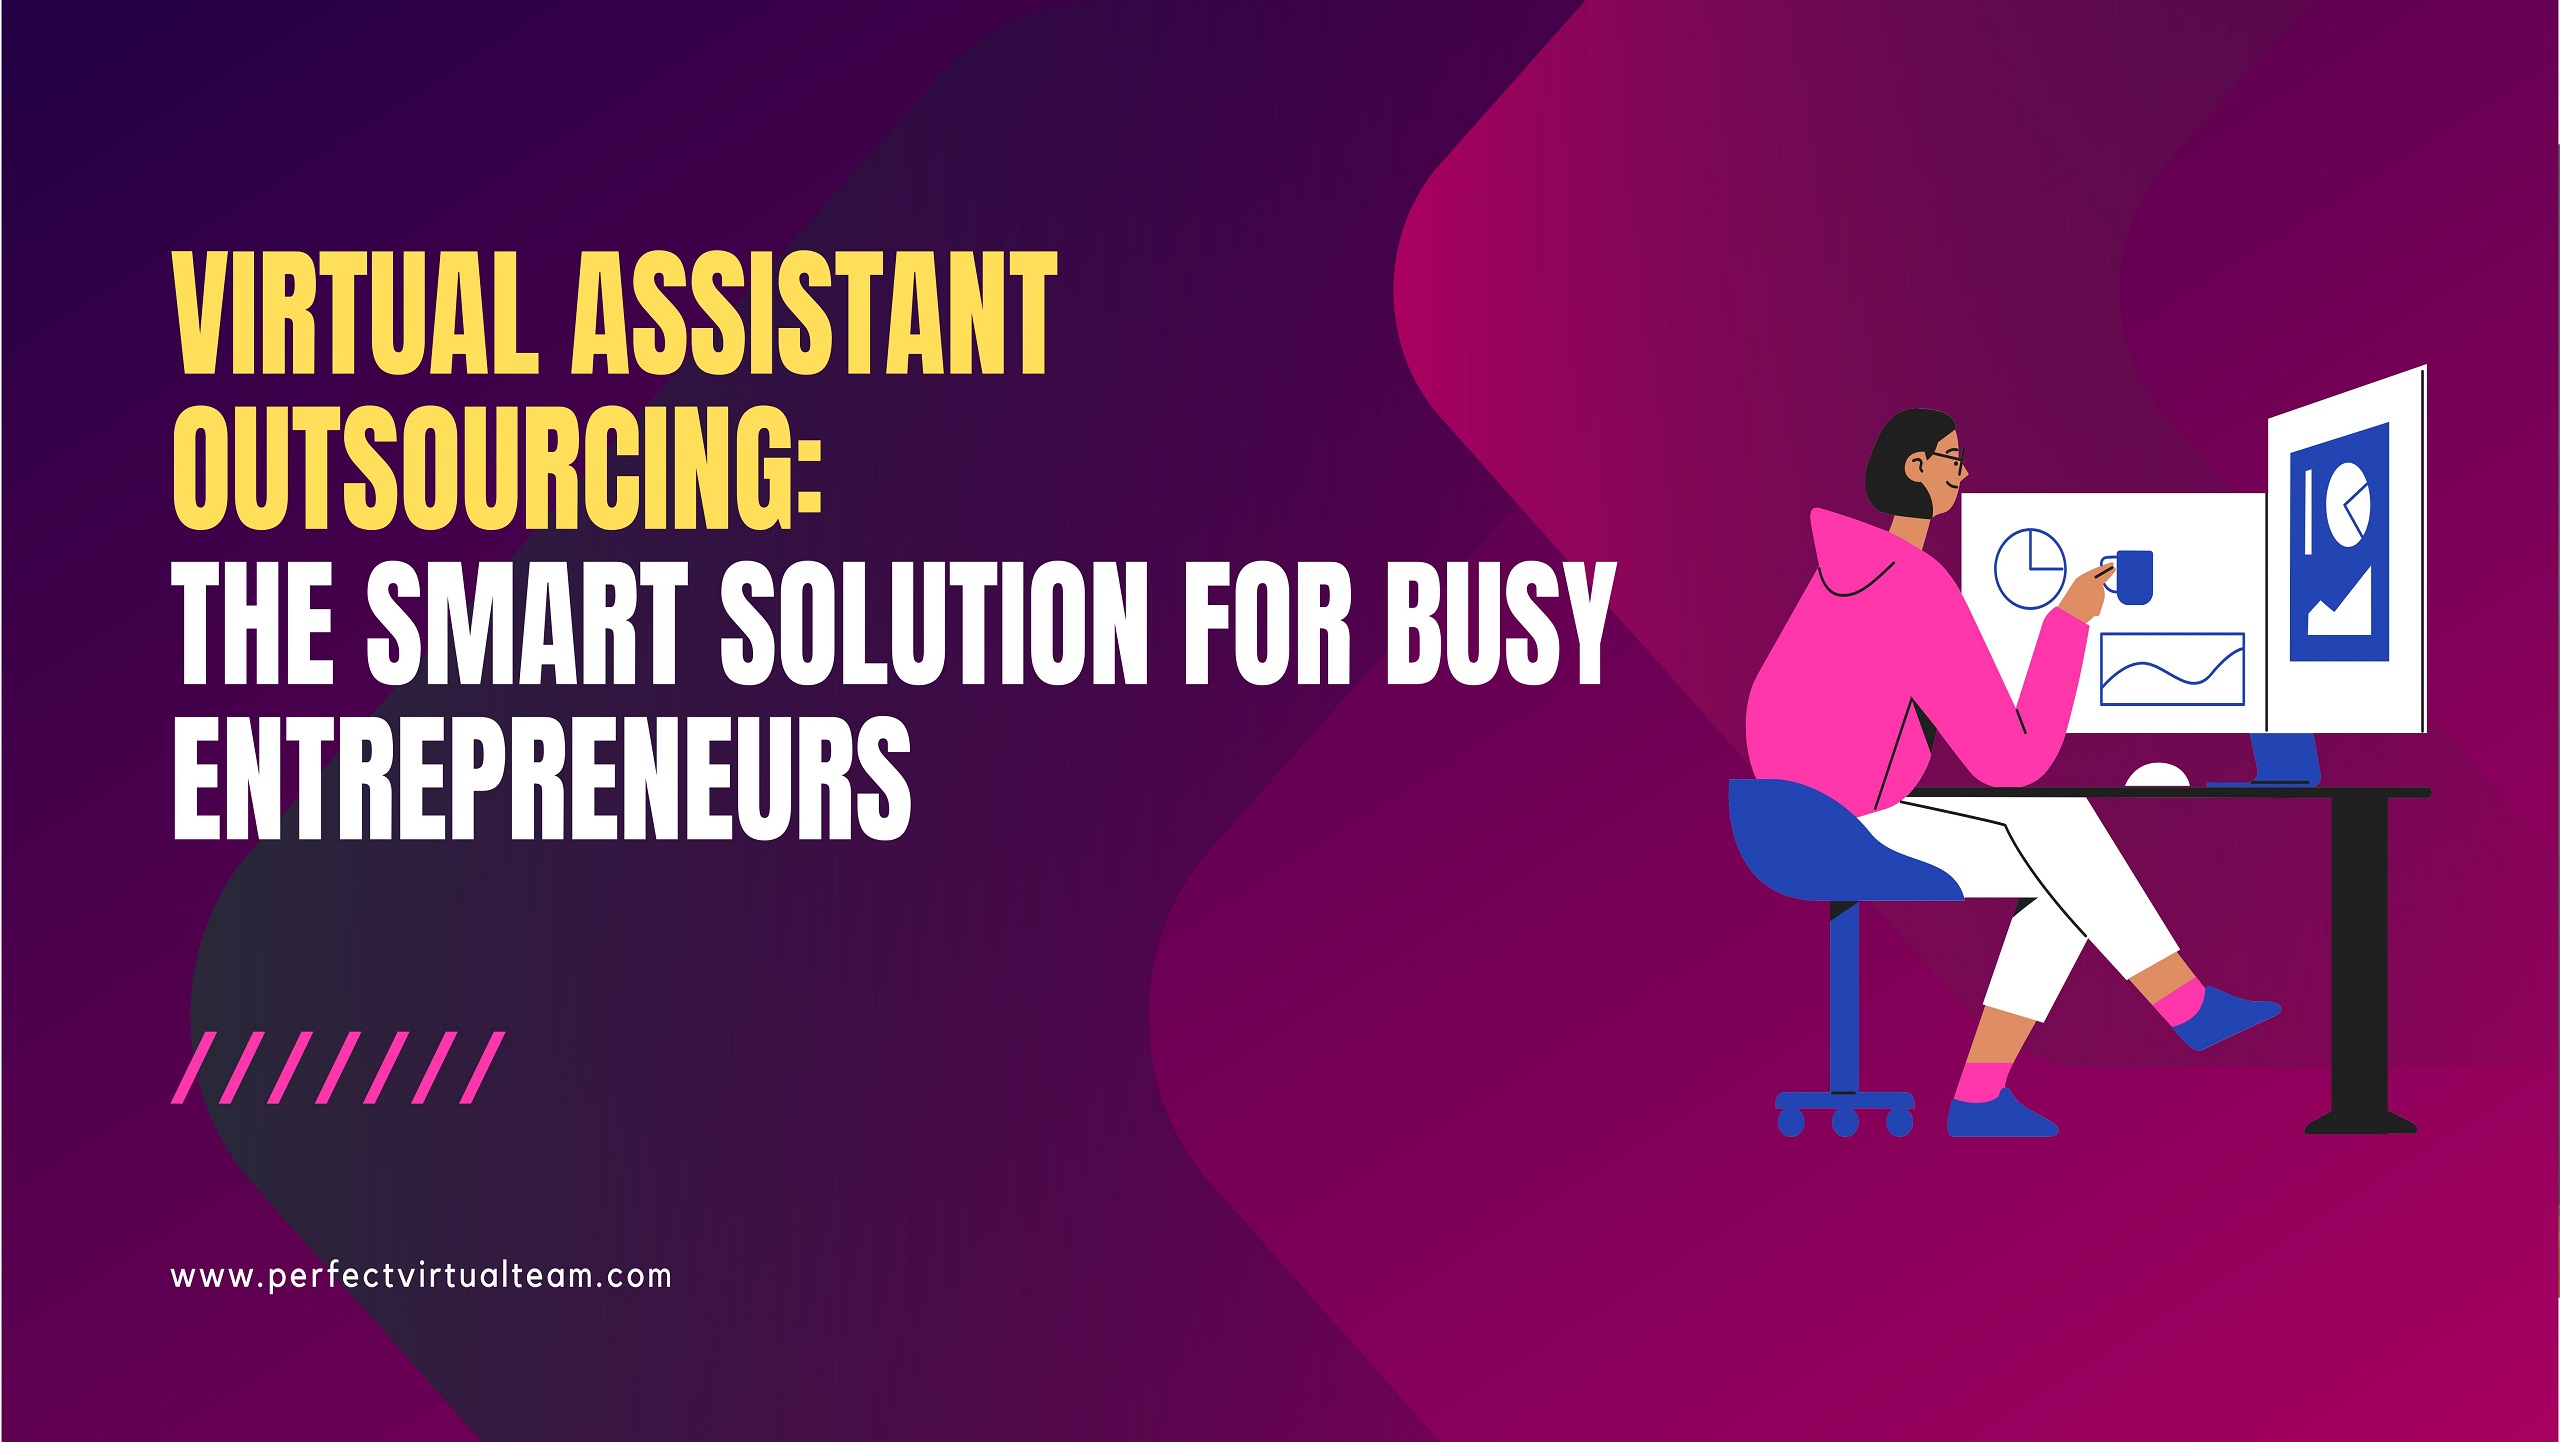 Virtual Assistant Outsourcing: The Smart Solution for Busy Entrepreneurs